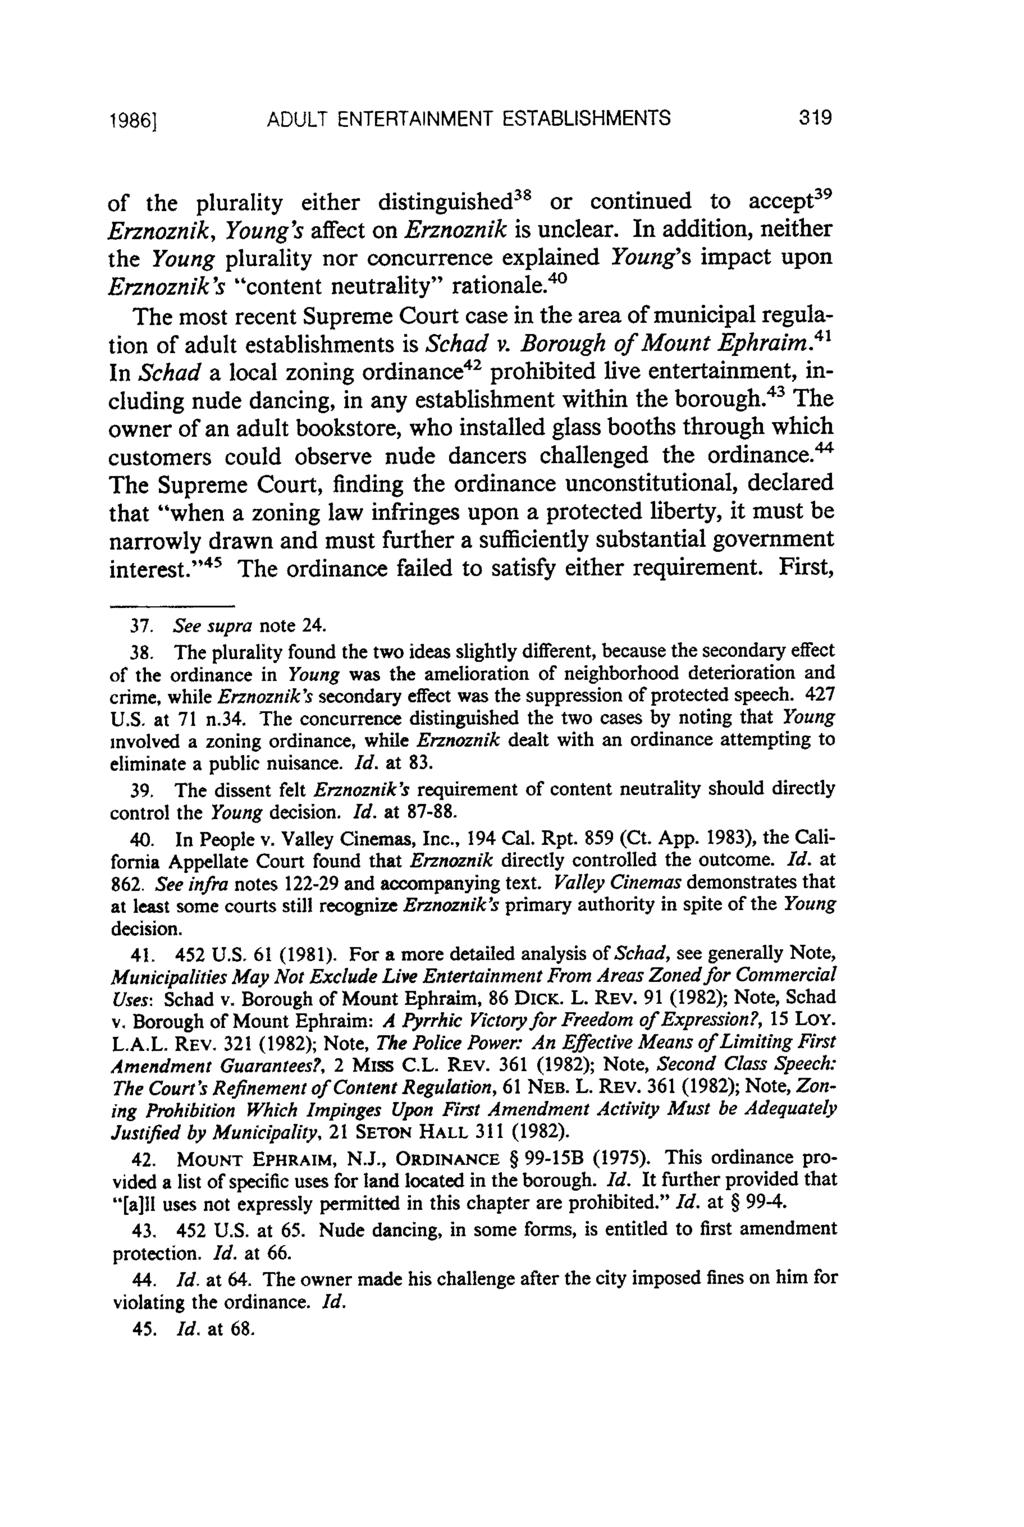 1986] ADULT ENTERTAINMENT ESTABLISHMENTS of the plurality either distinguished" or continued to accept 3 9 Erznoznik, Young's affect on Erznoznik is unclear.